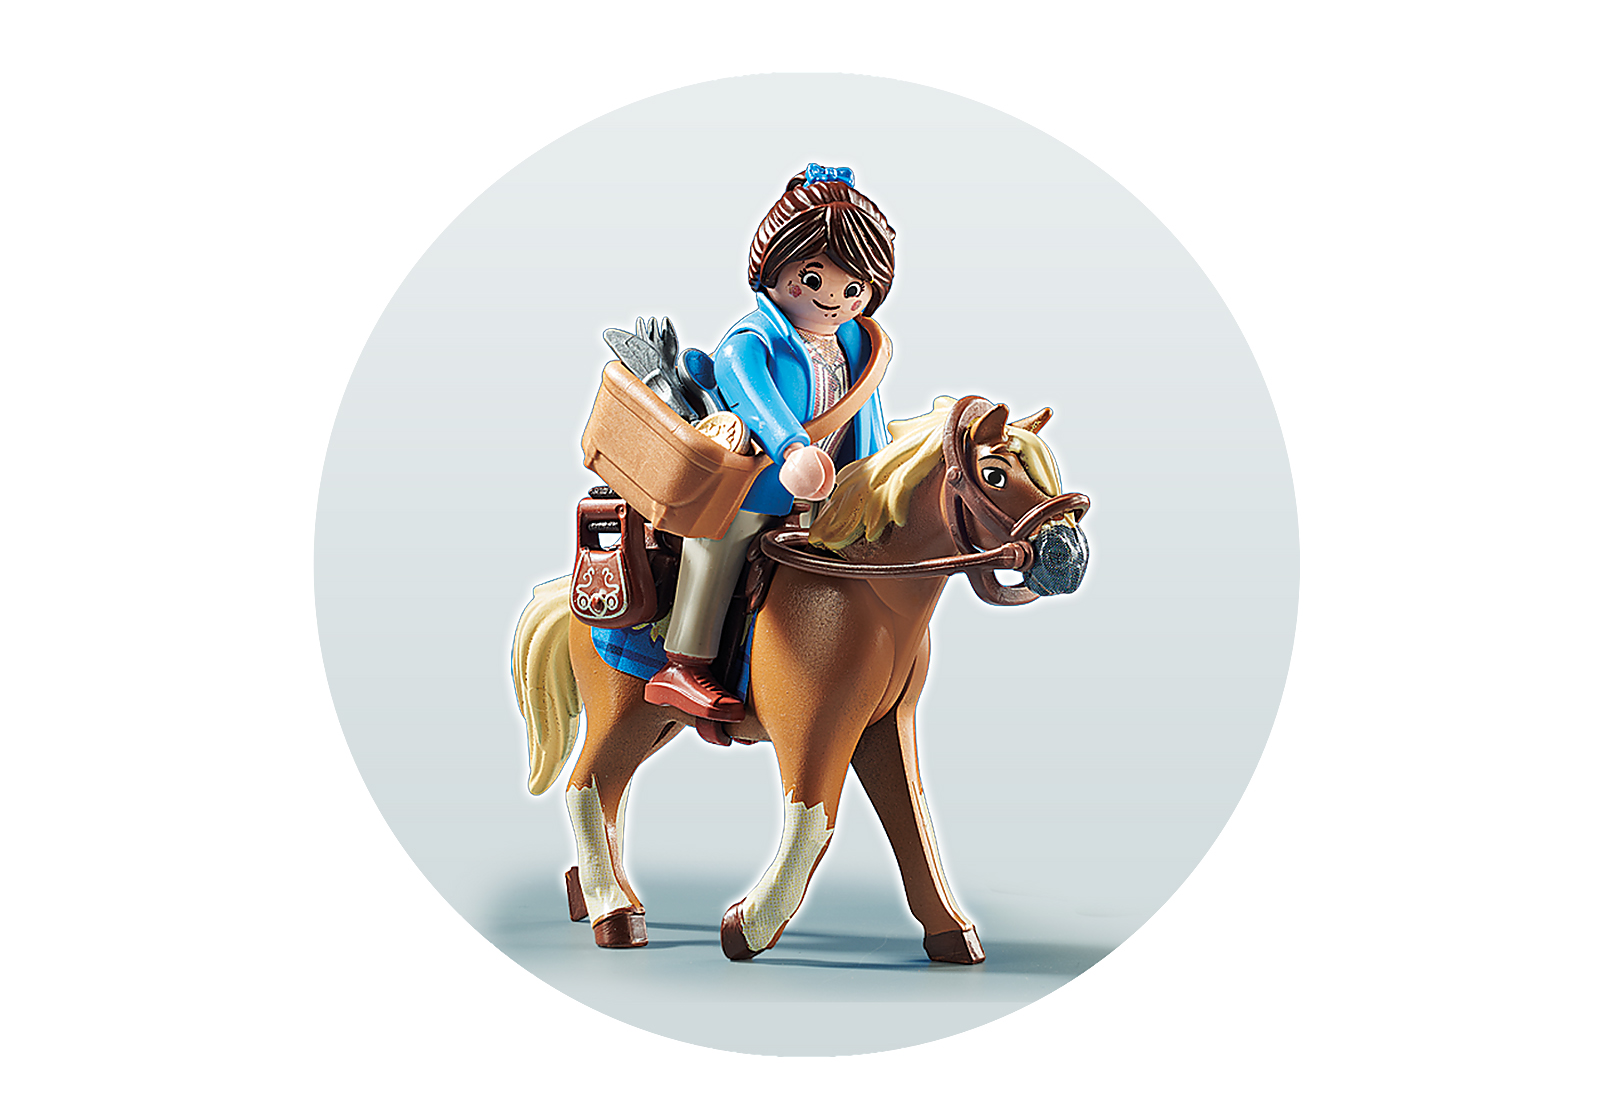 Playmobil The Movie Marla W Ith Horse - image 5 of 5